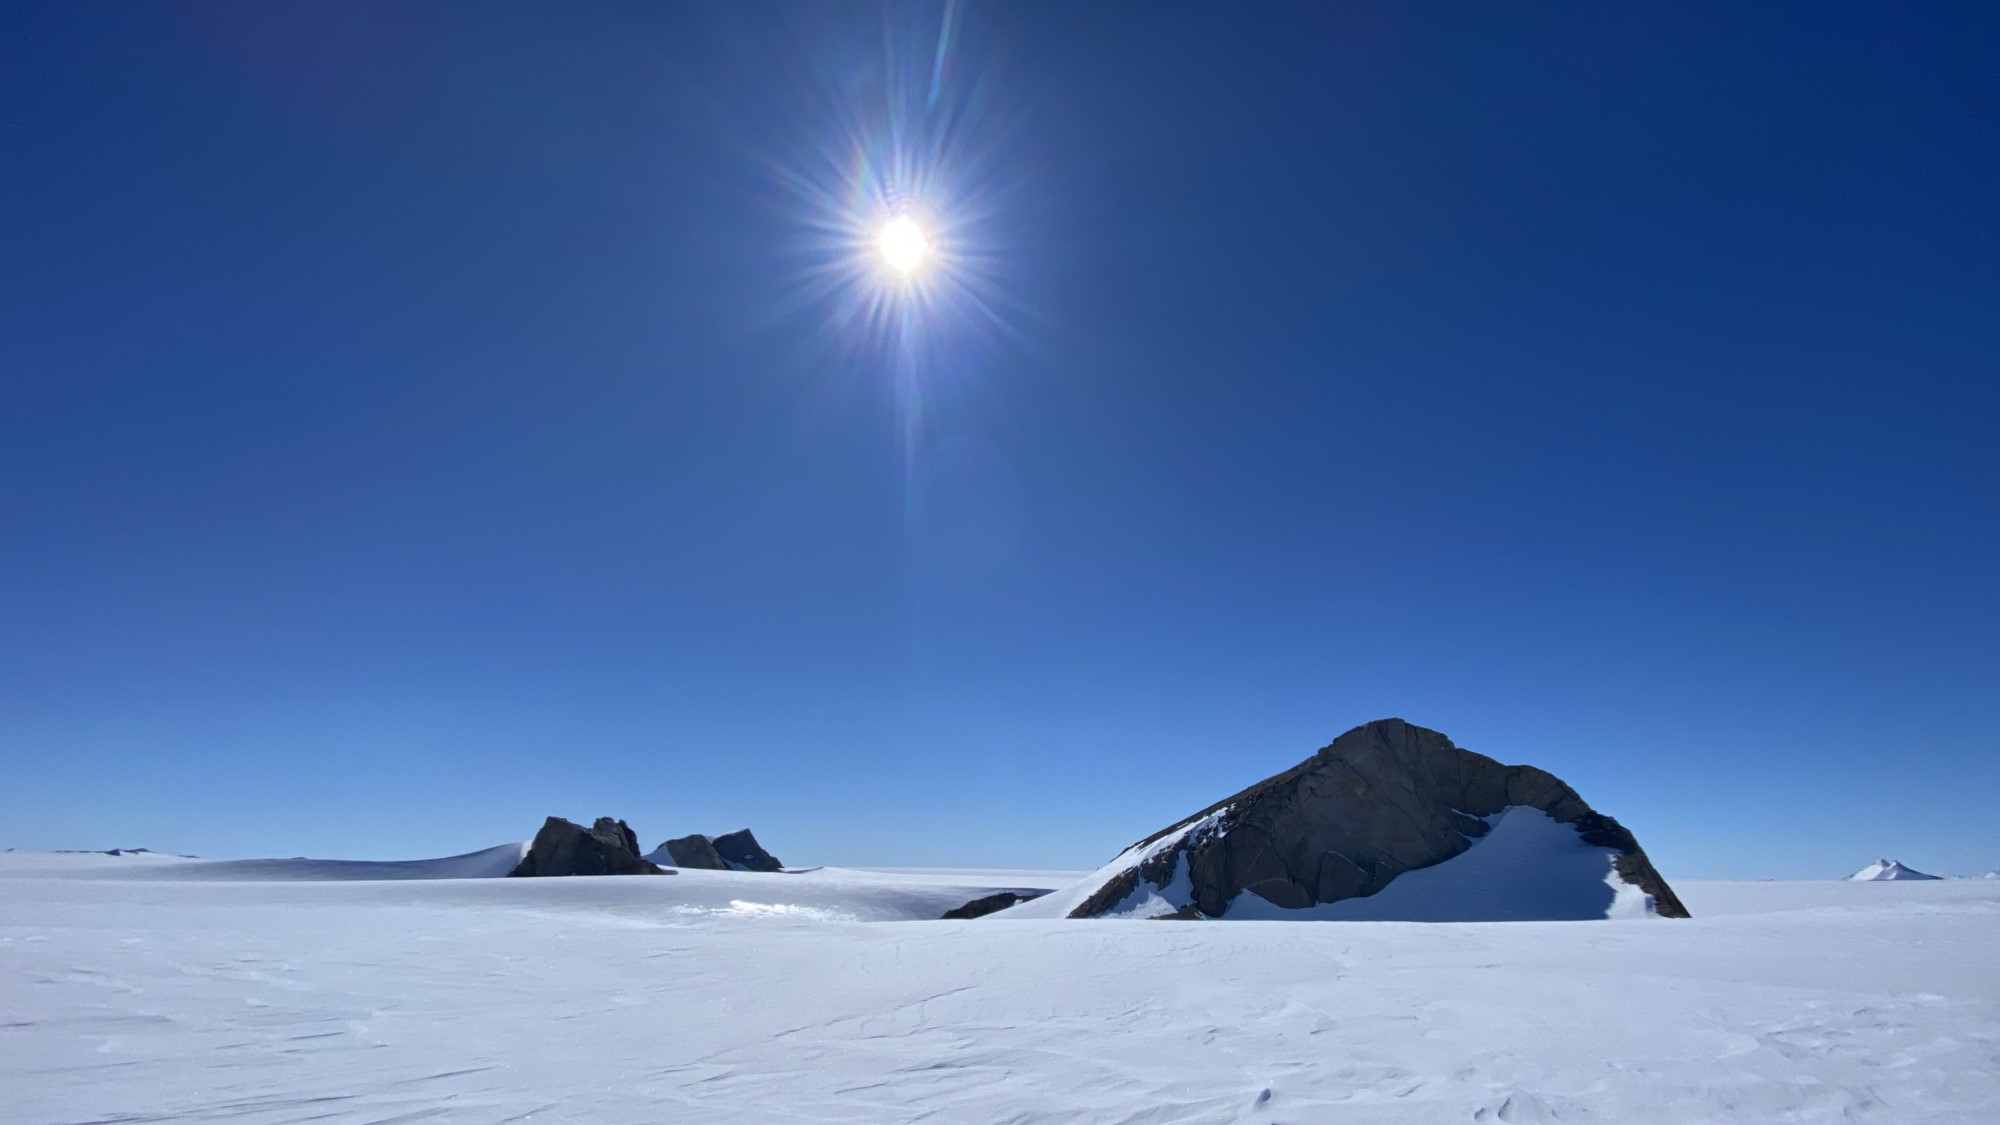 The snowy landscape of Antarctica where five meteorites, including a rare 17-pound monster, were recovered.